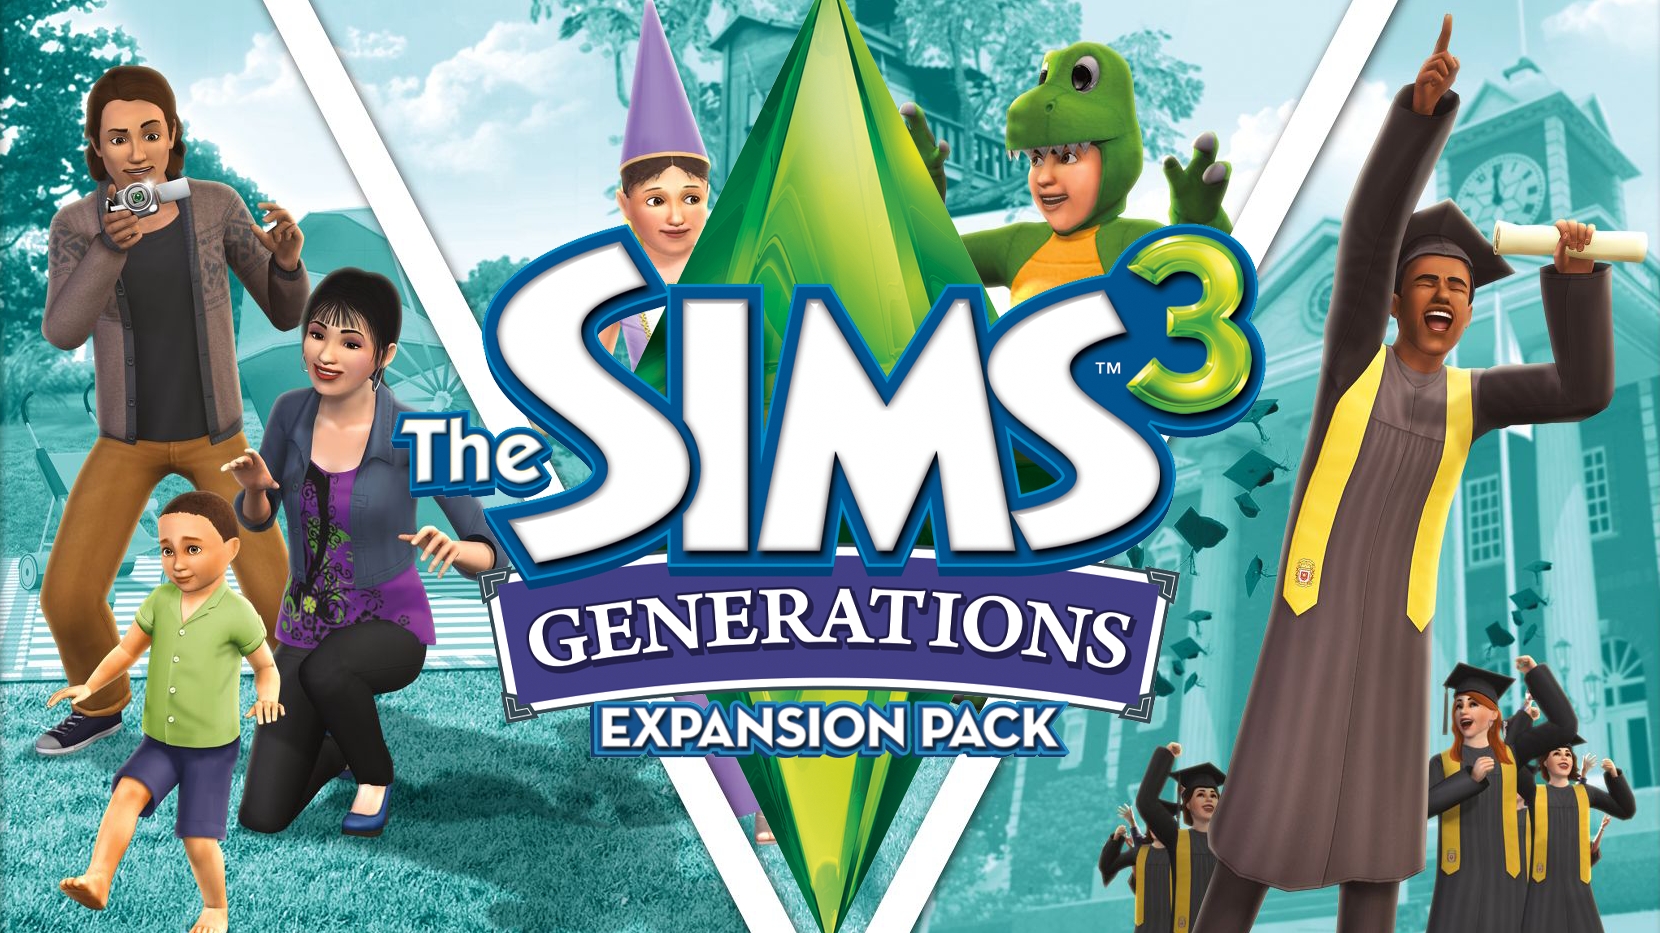 Sims 3 generations mac torrent download download photoshop cc for mac